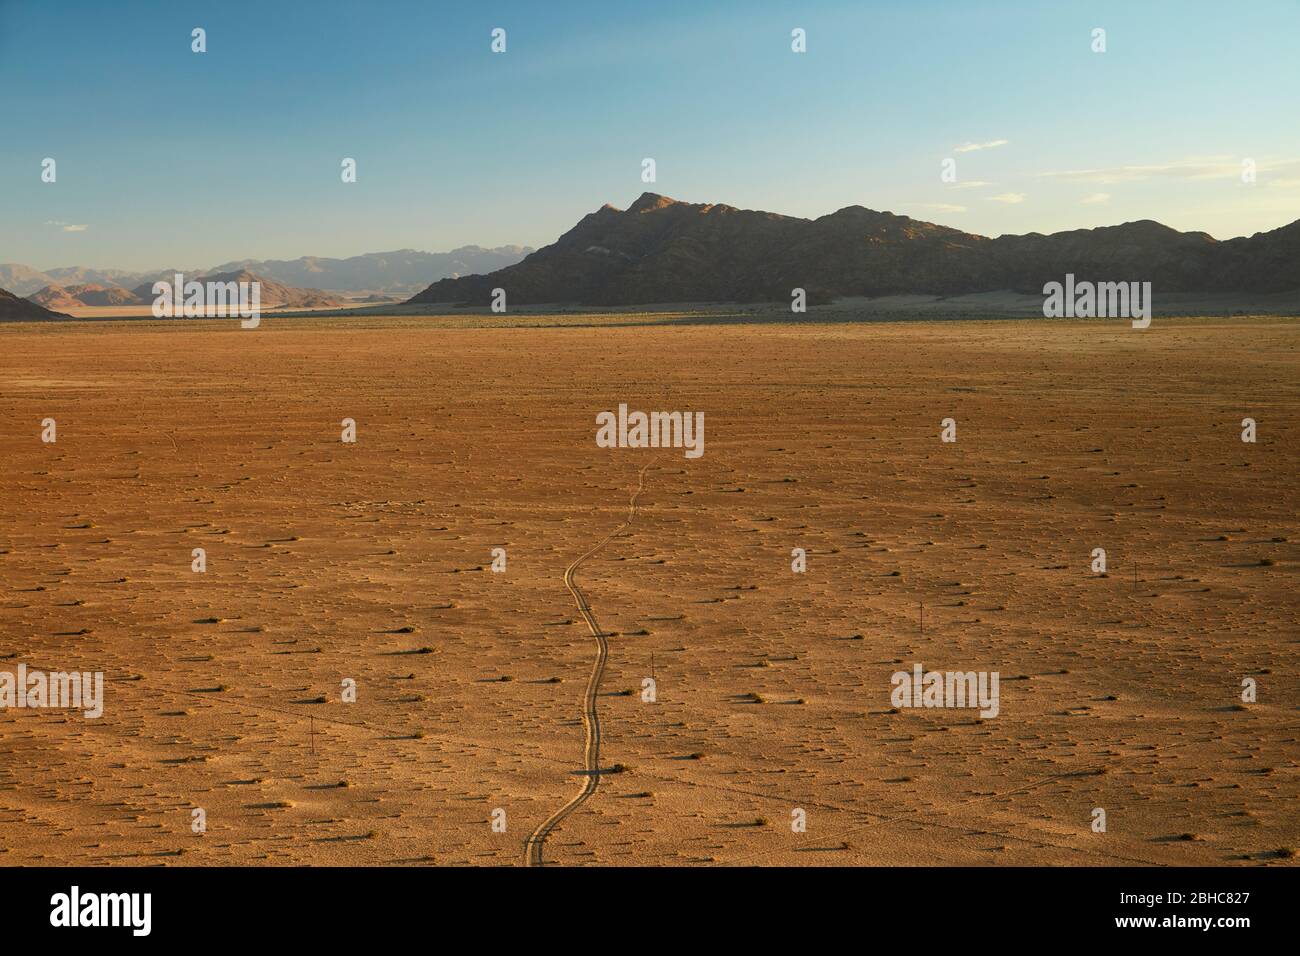 View of track across plain and mountains from high on a rock koppie above Desert Camp, Sesriem, Namib Desert, Namibia, Africa Stock Photo